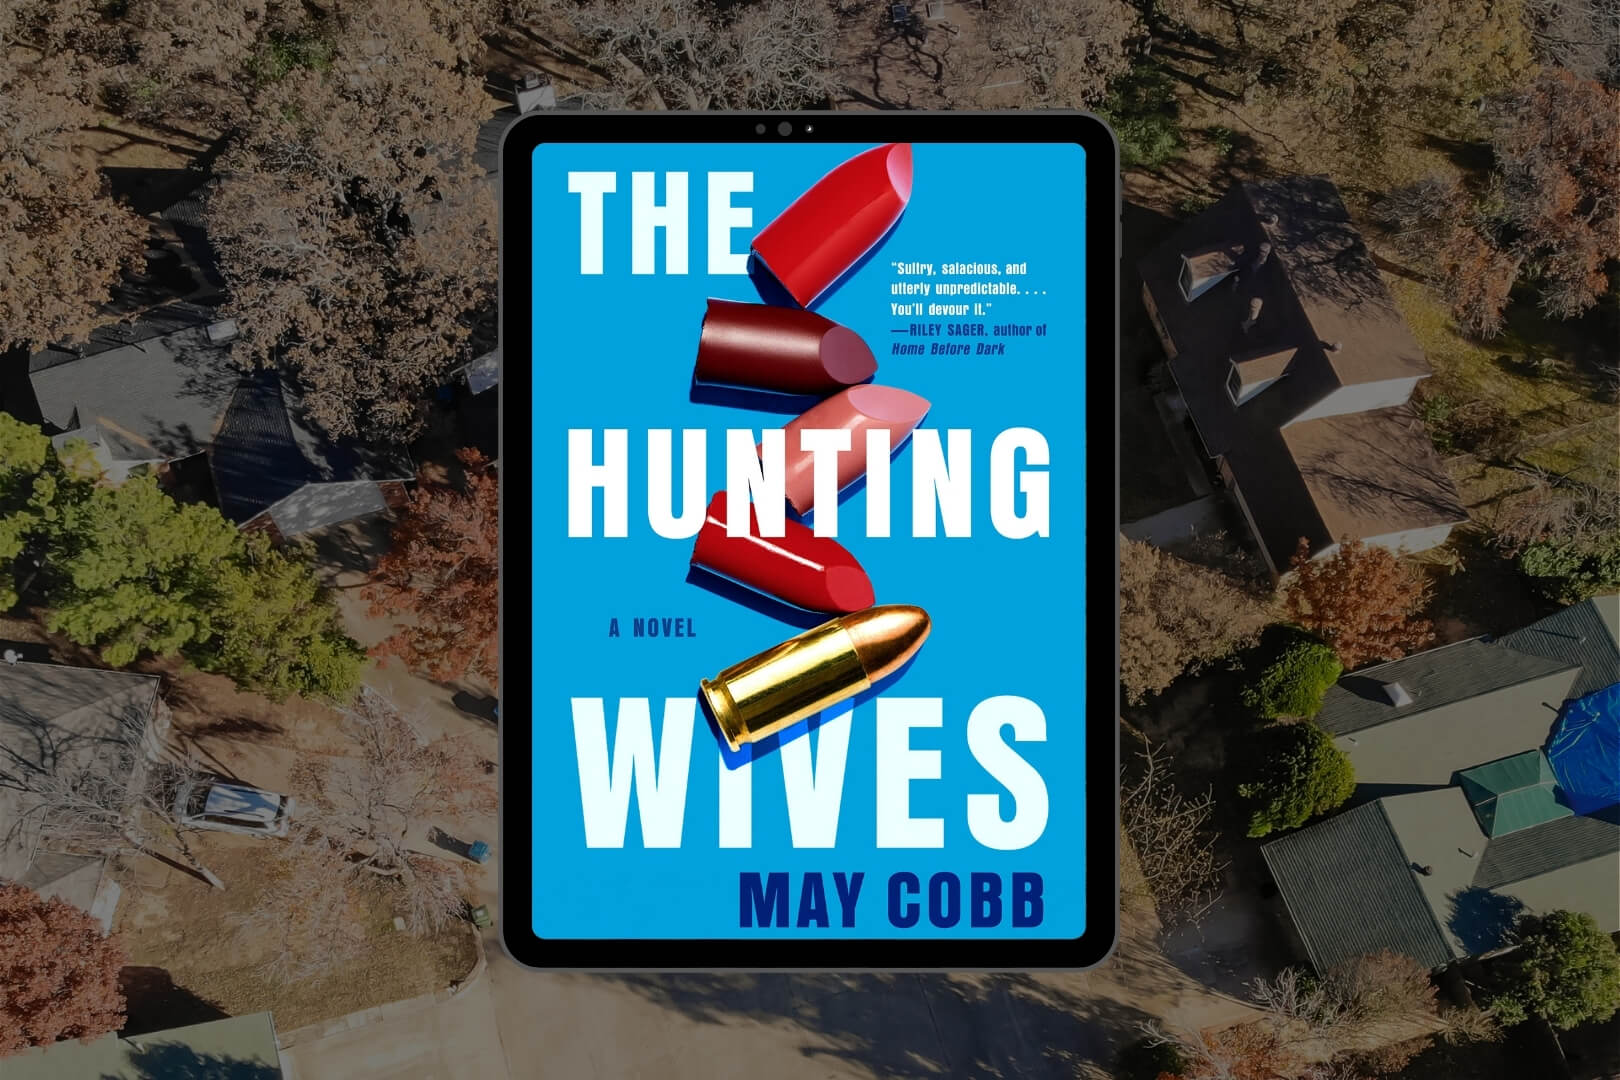 Book Club Questions for The Hunting Wives by May Cobb